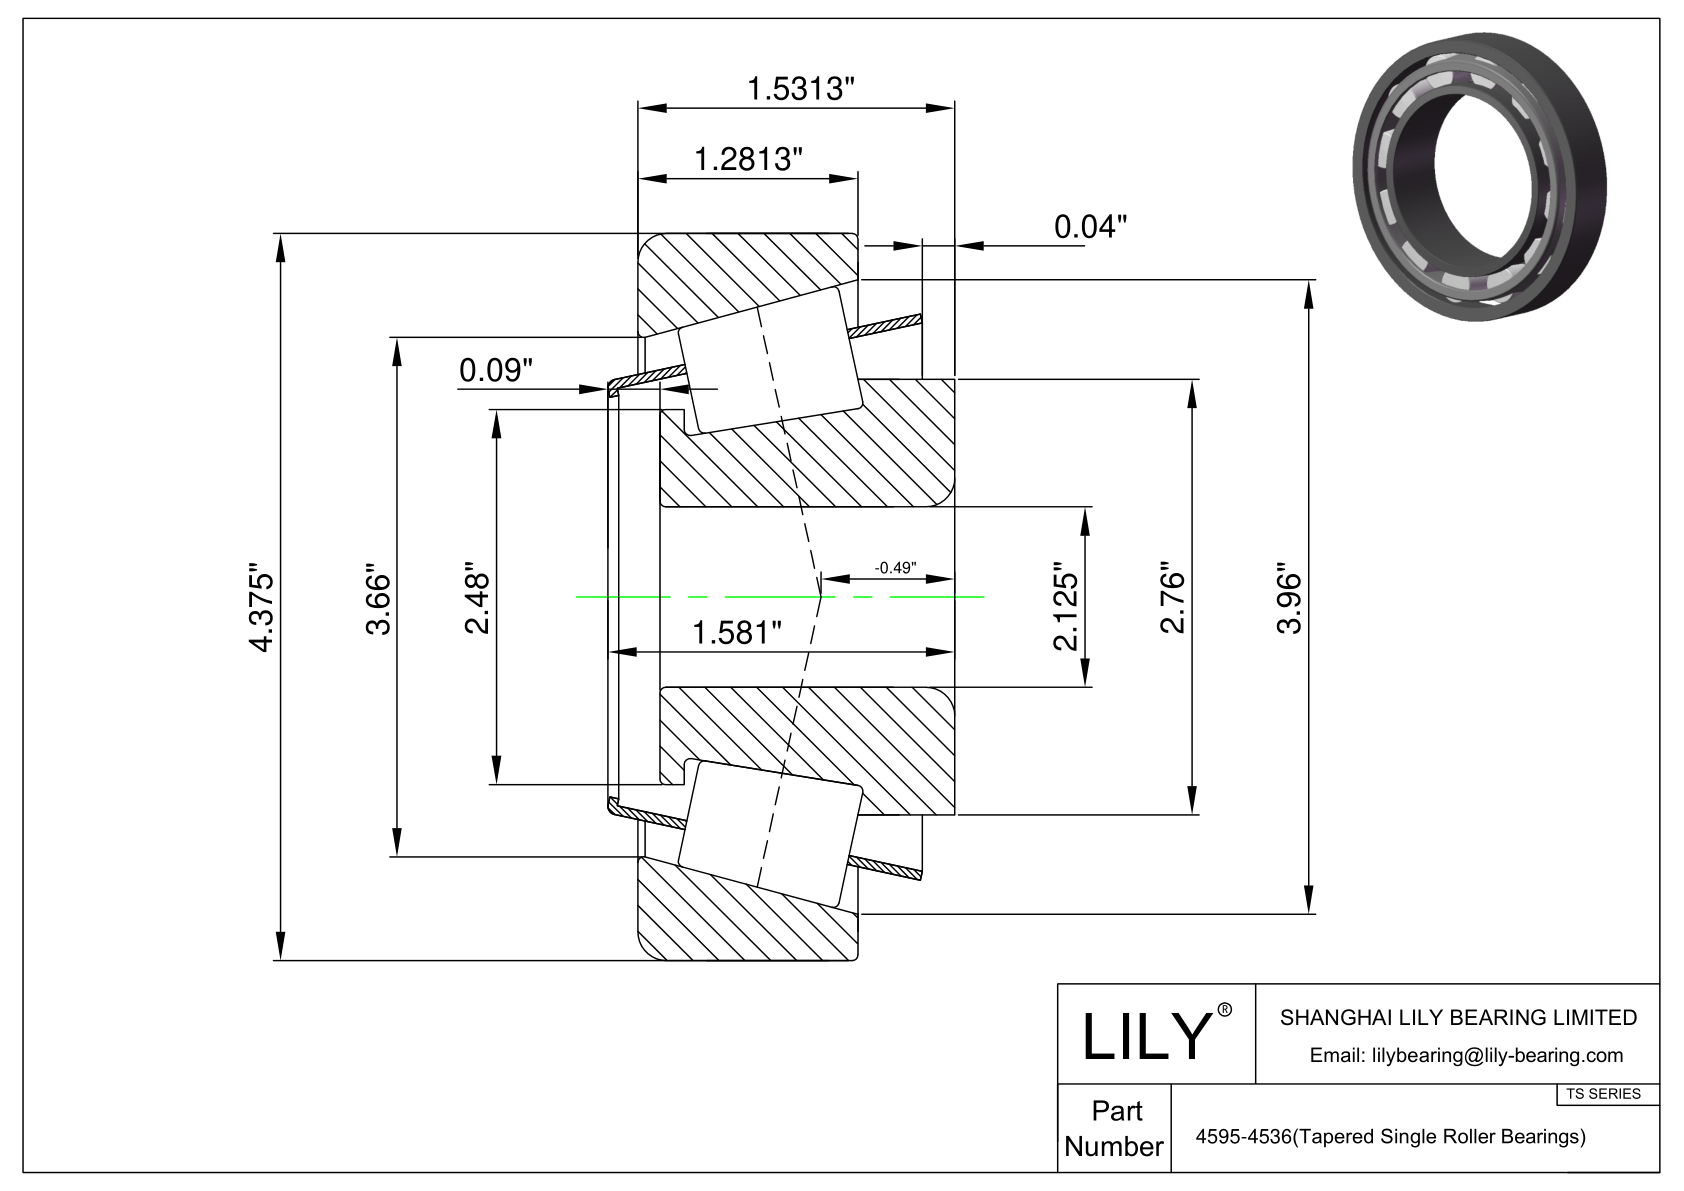 4595-4536 TS (Tapered Single Roller Bearings) (Imperial) cad drawing